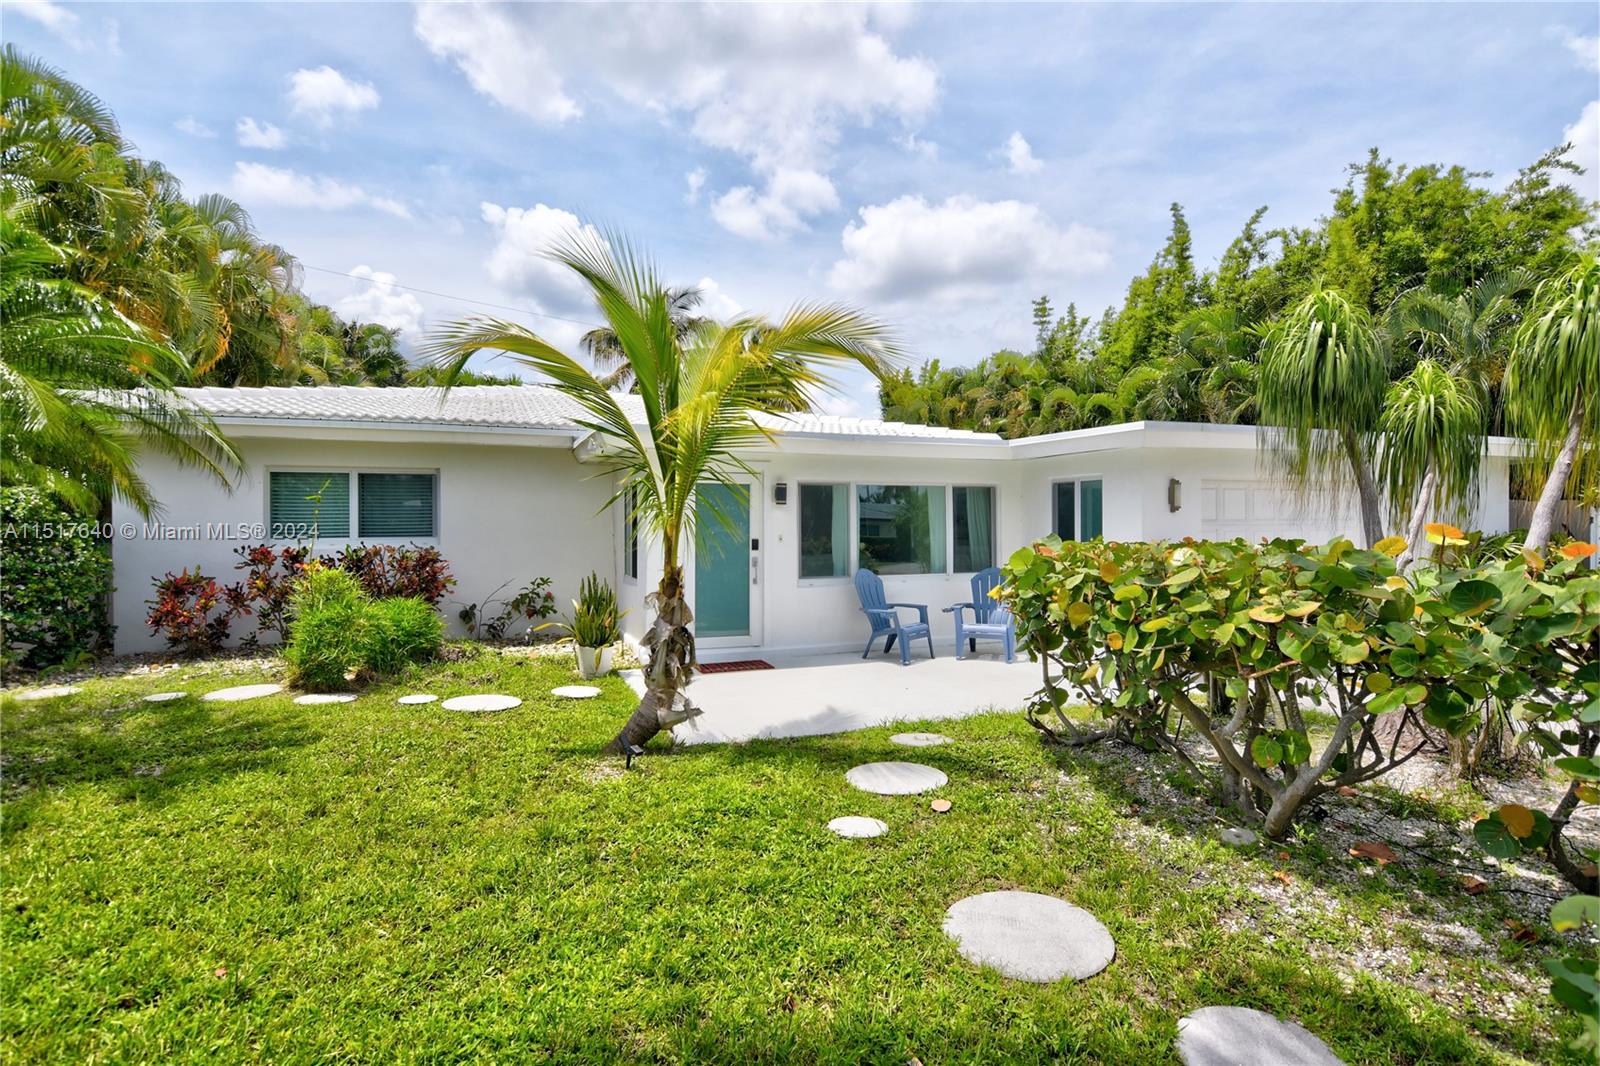 262 Bombay Ave, Lauderdale By The Sea FL 33308